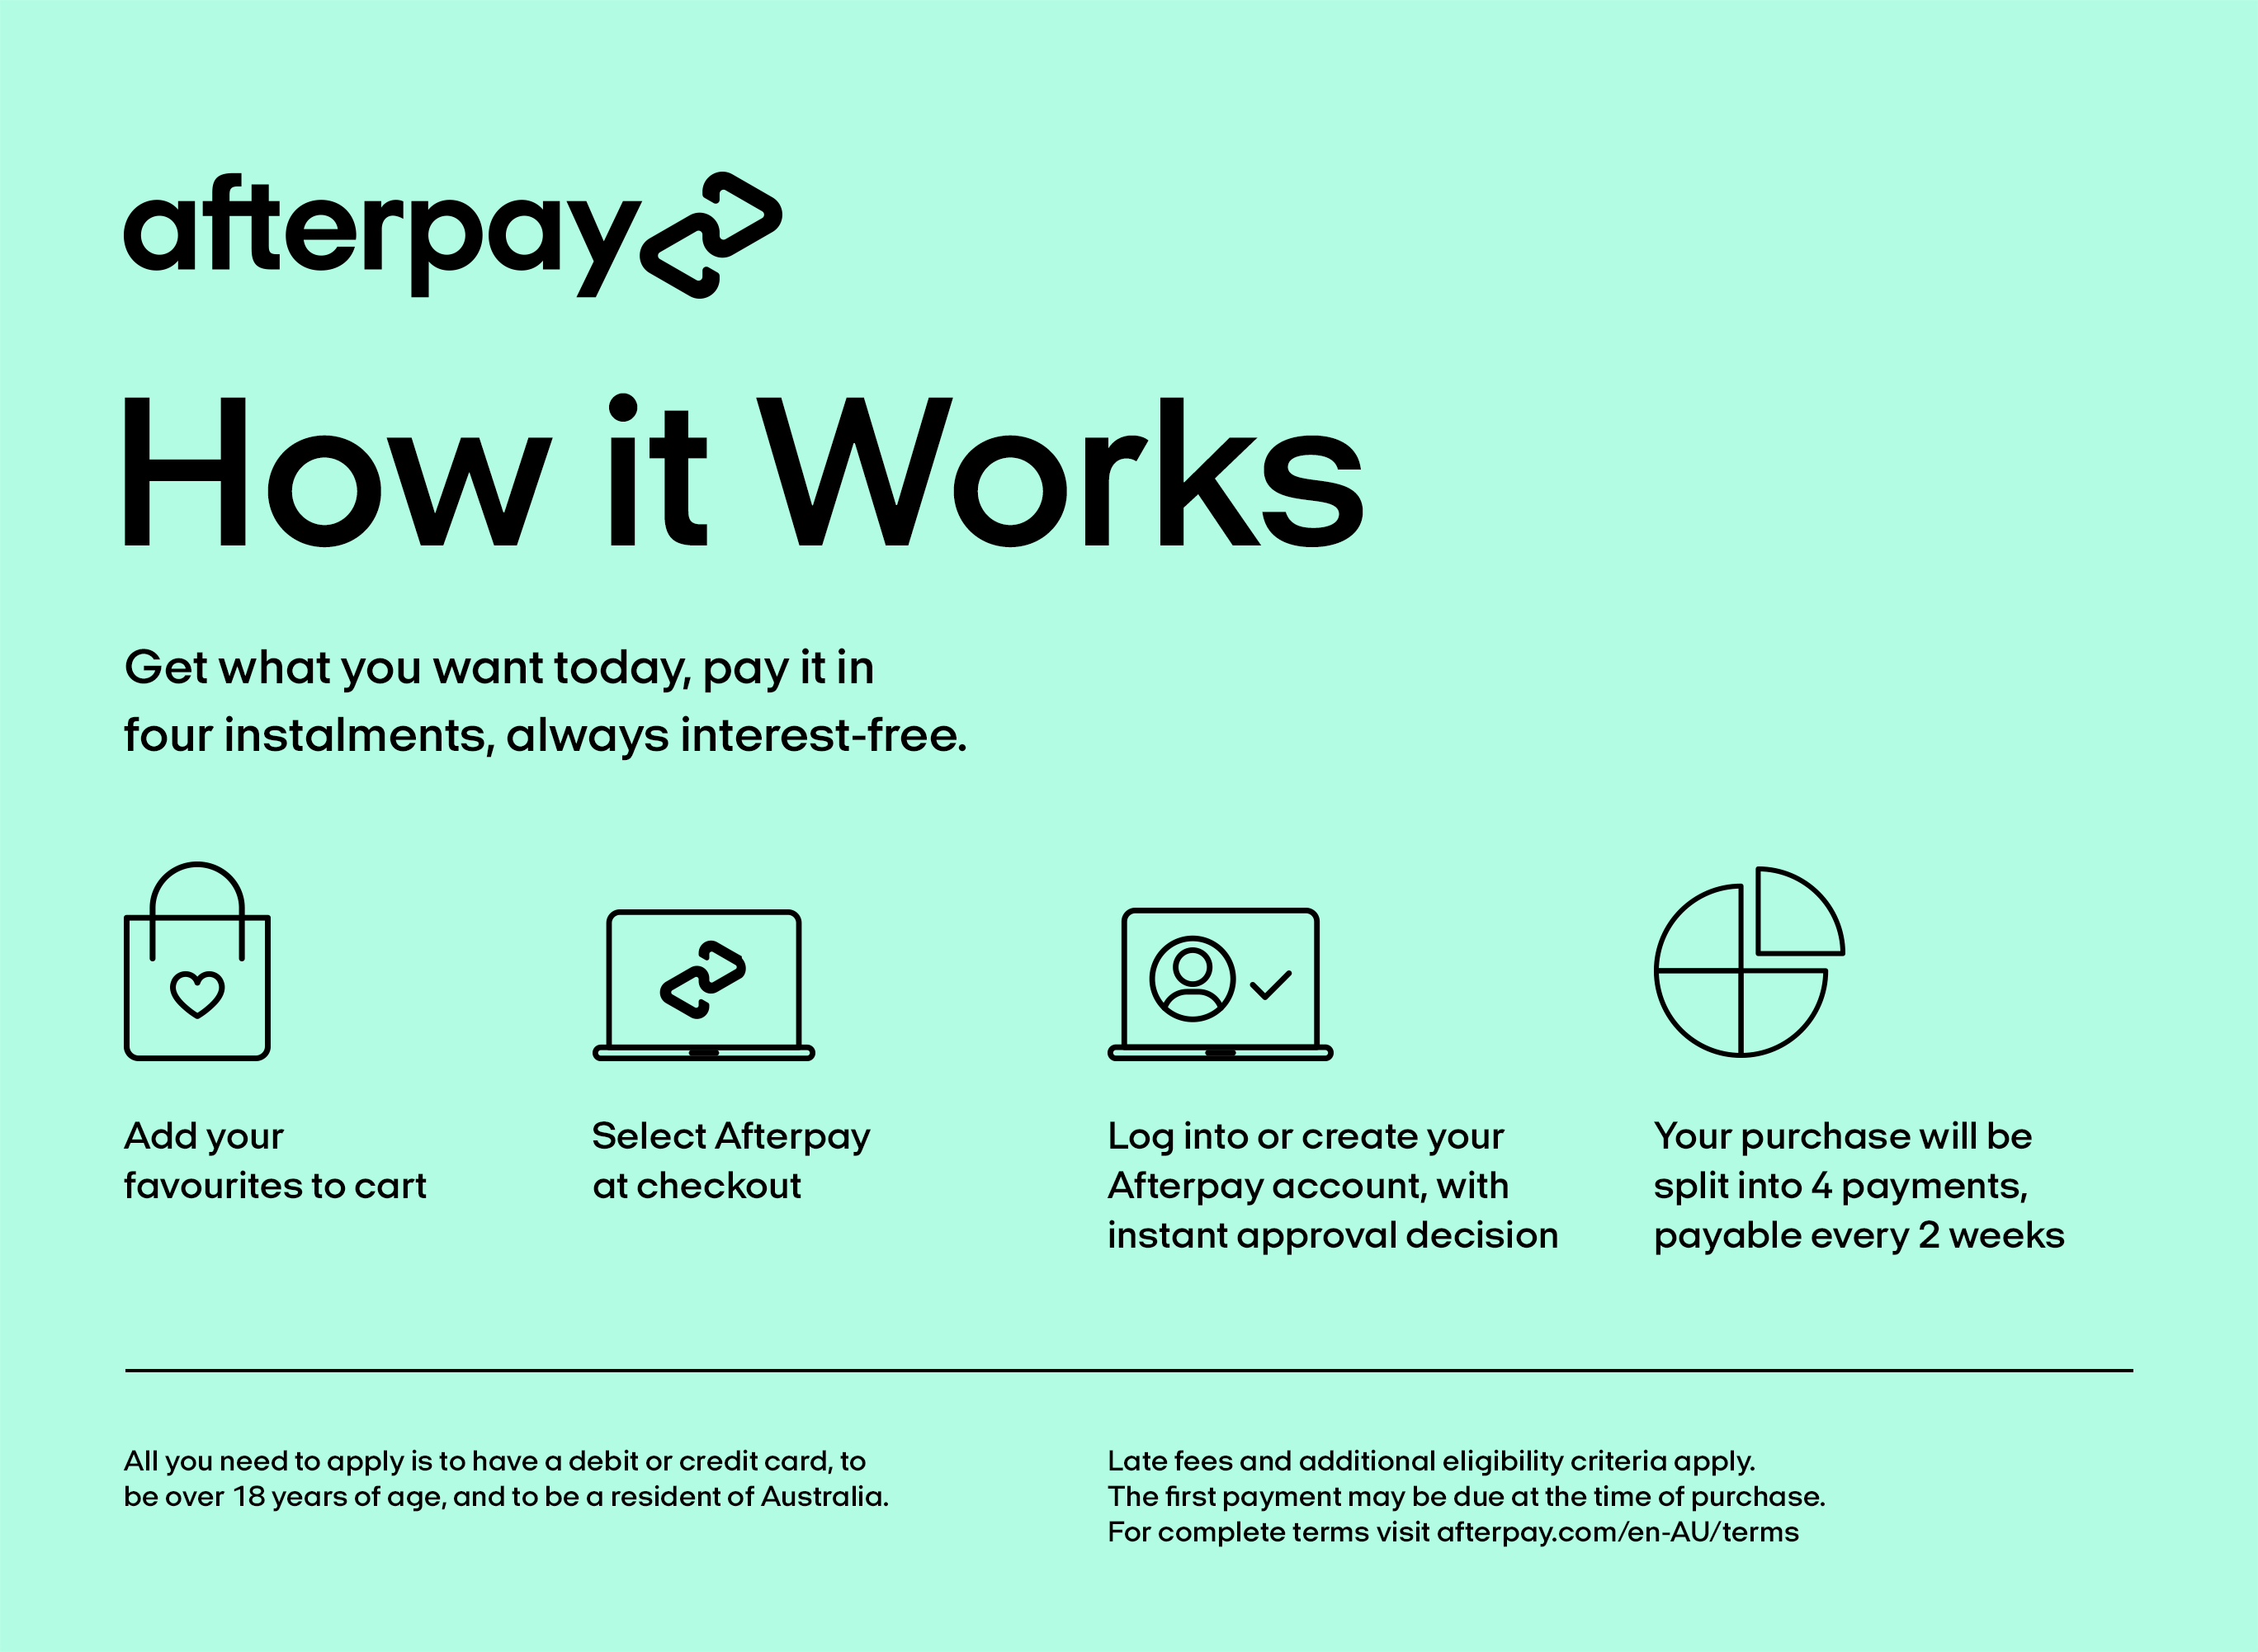 Afterpay - How it works